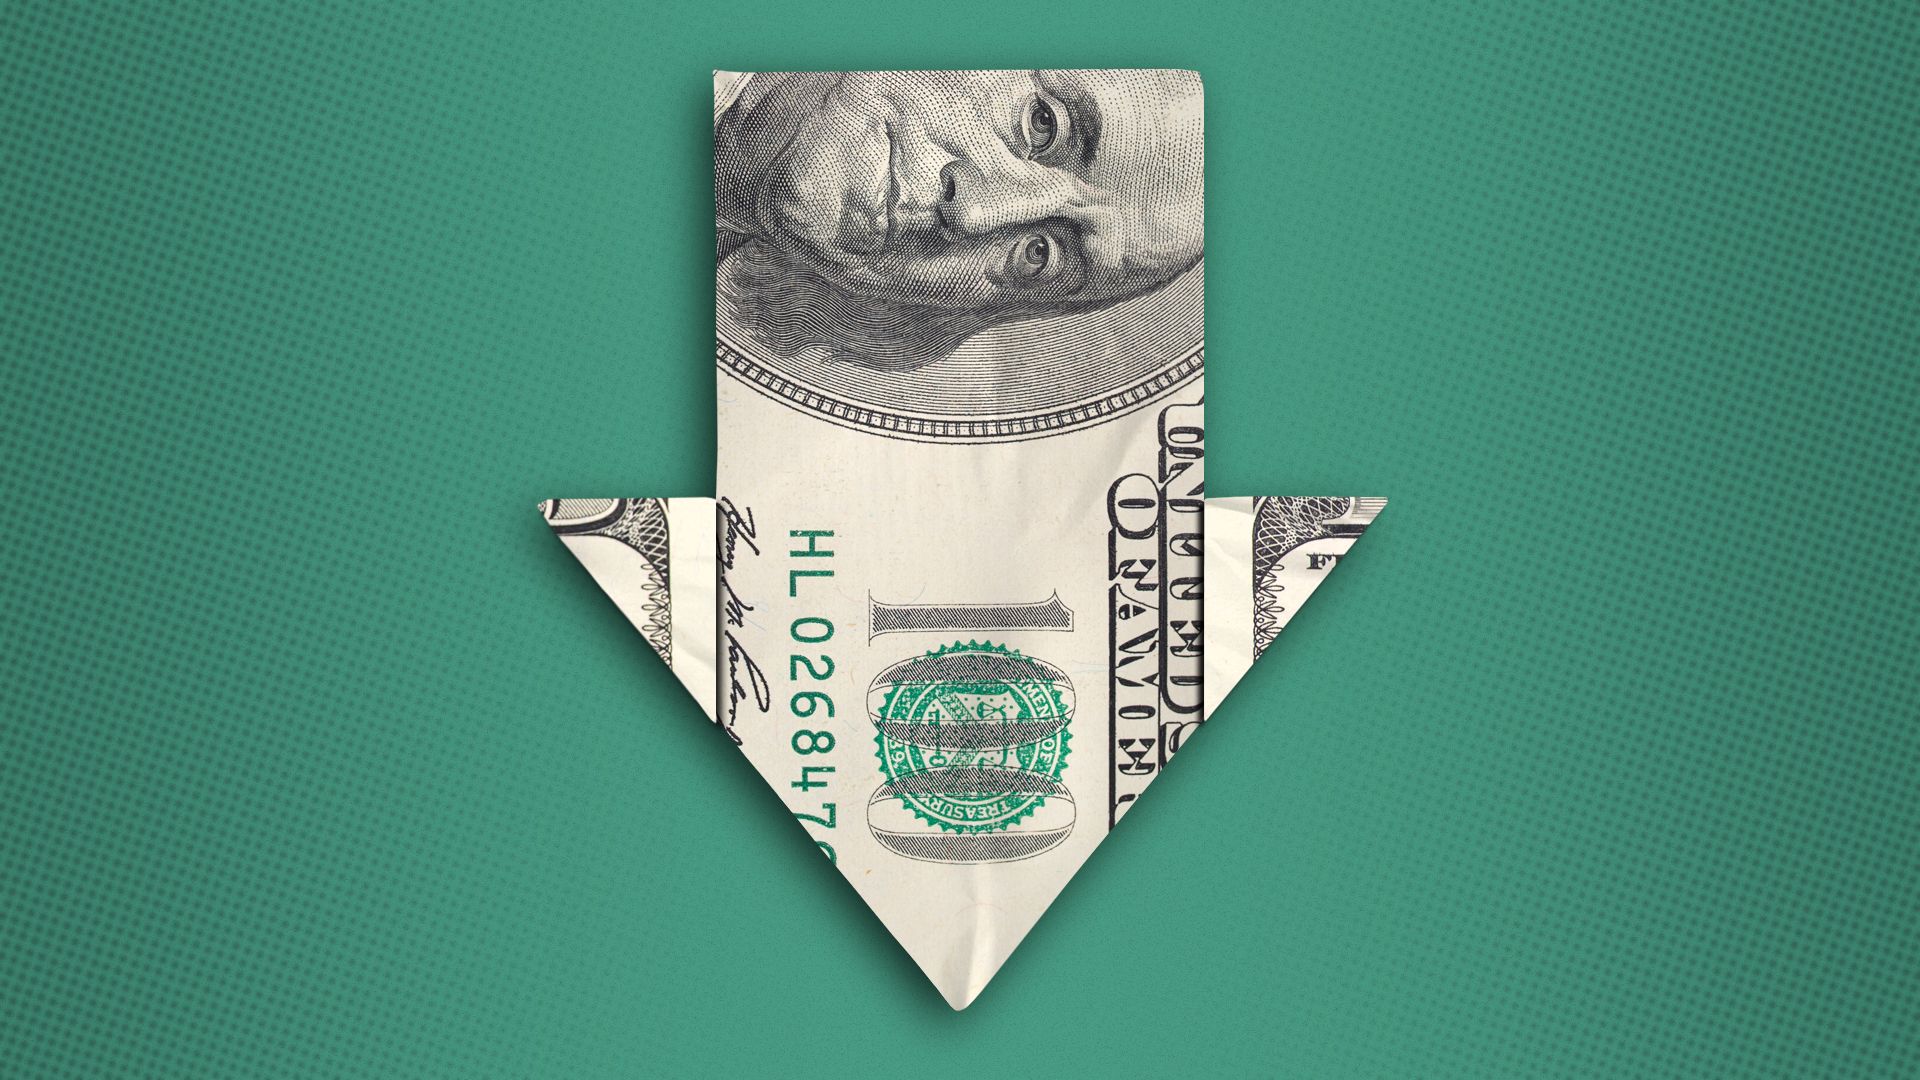 Illustration of a one hundred dollar bill folded into an arrow pointed downward.